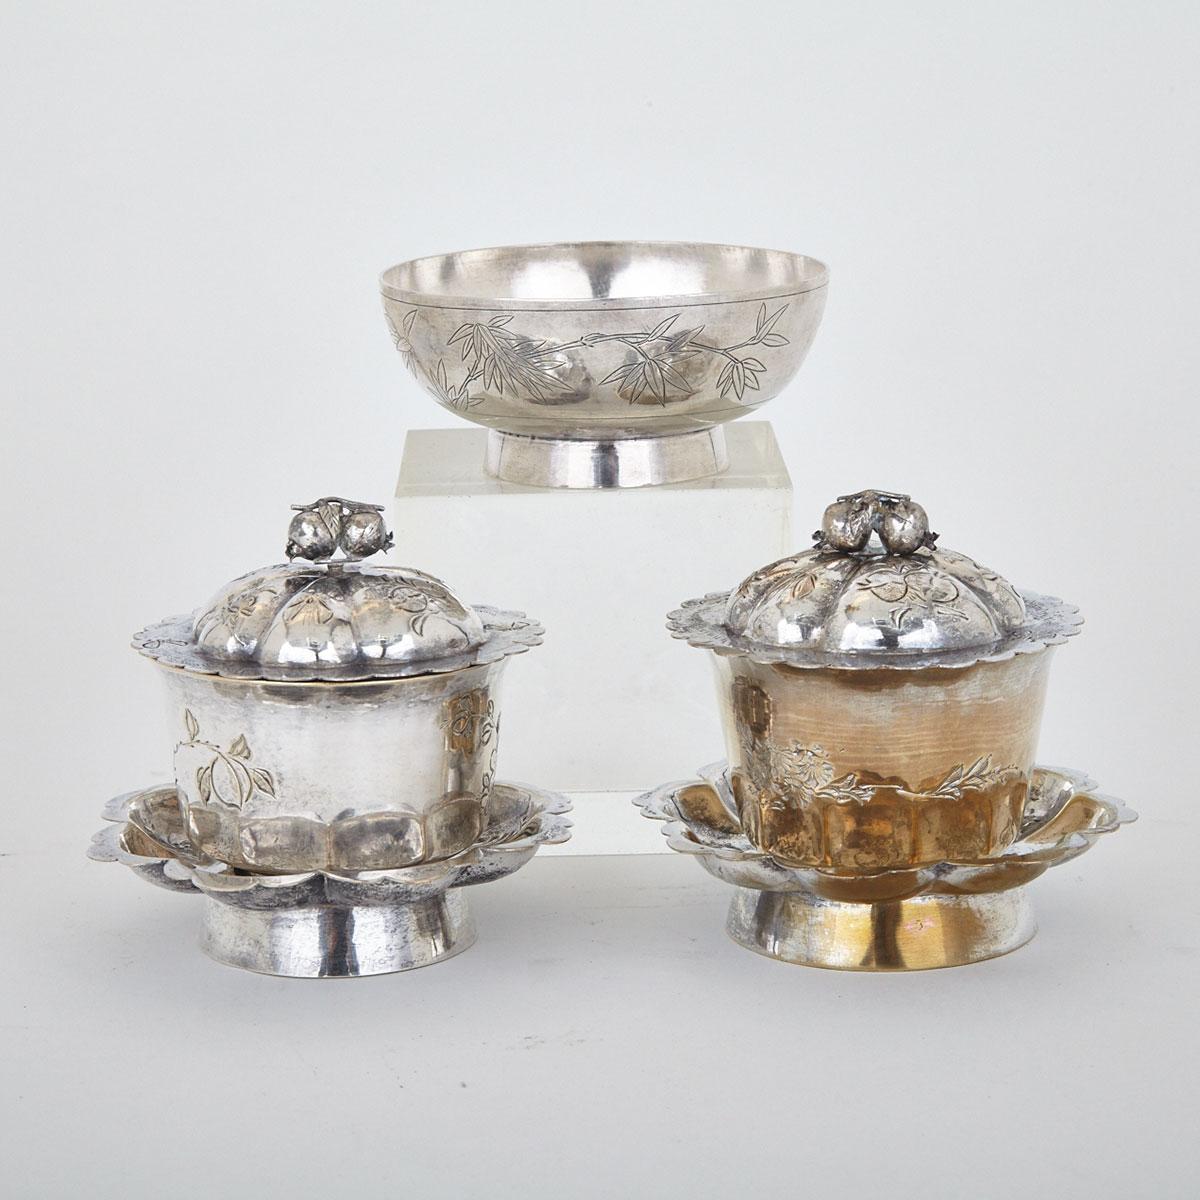 Pair of Export Silver Covered Cups, Circa 1900